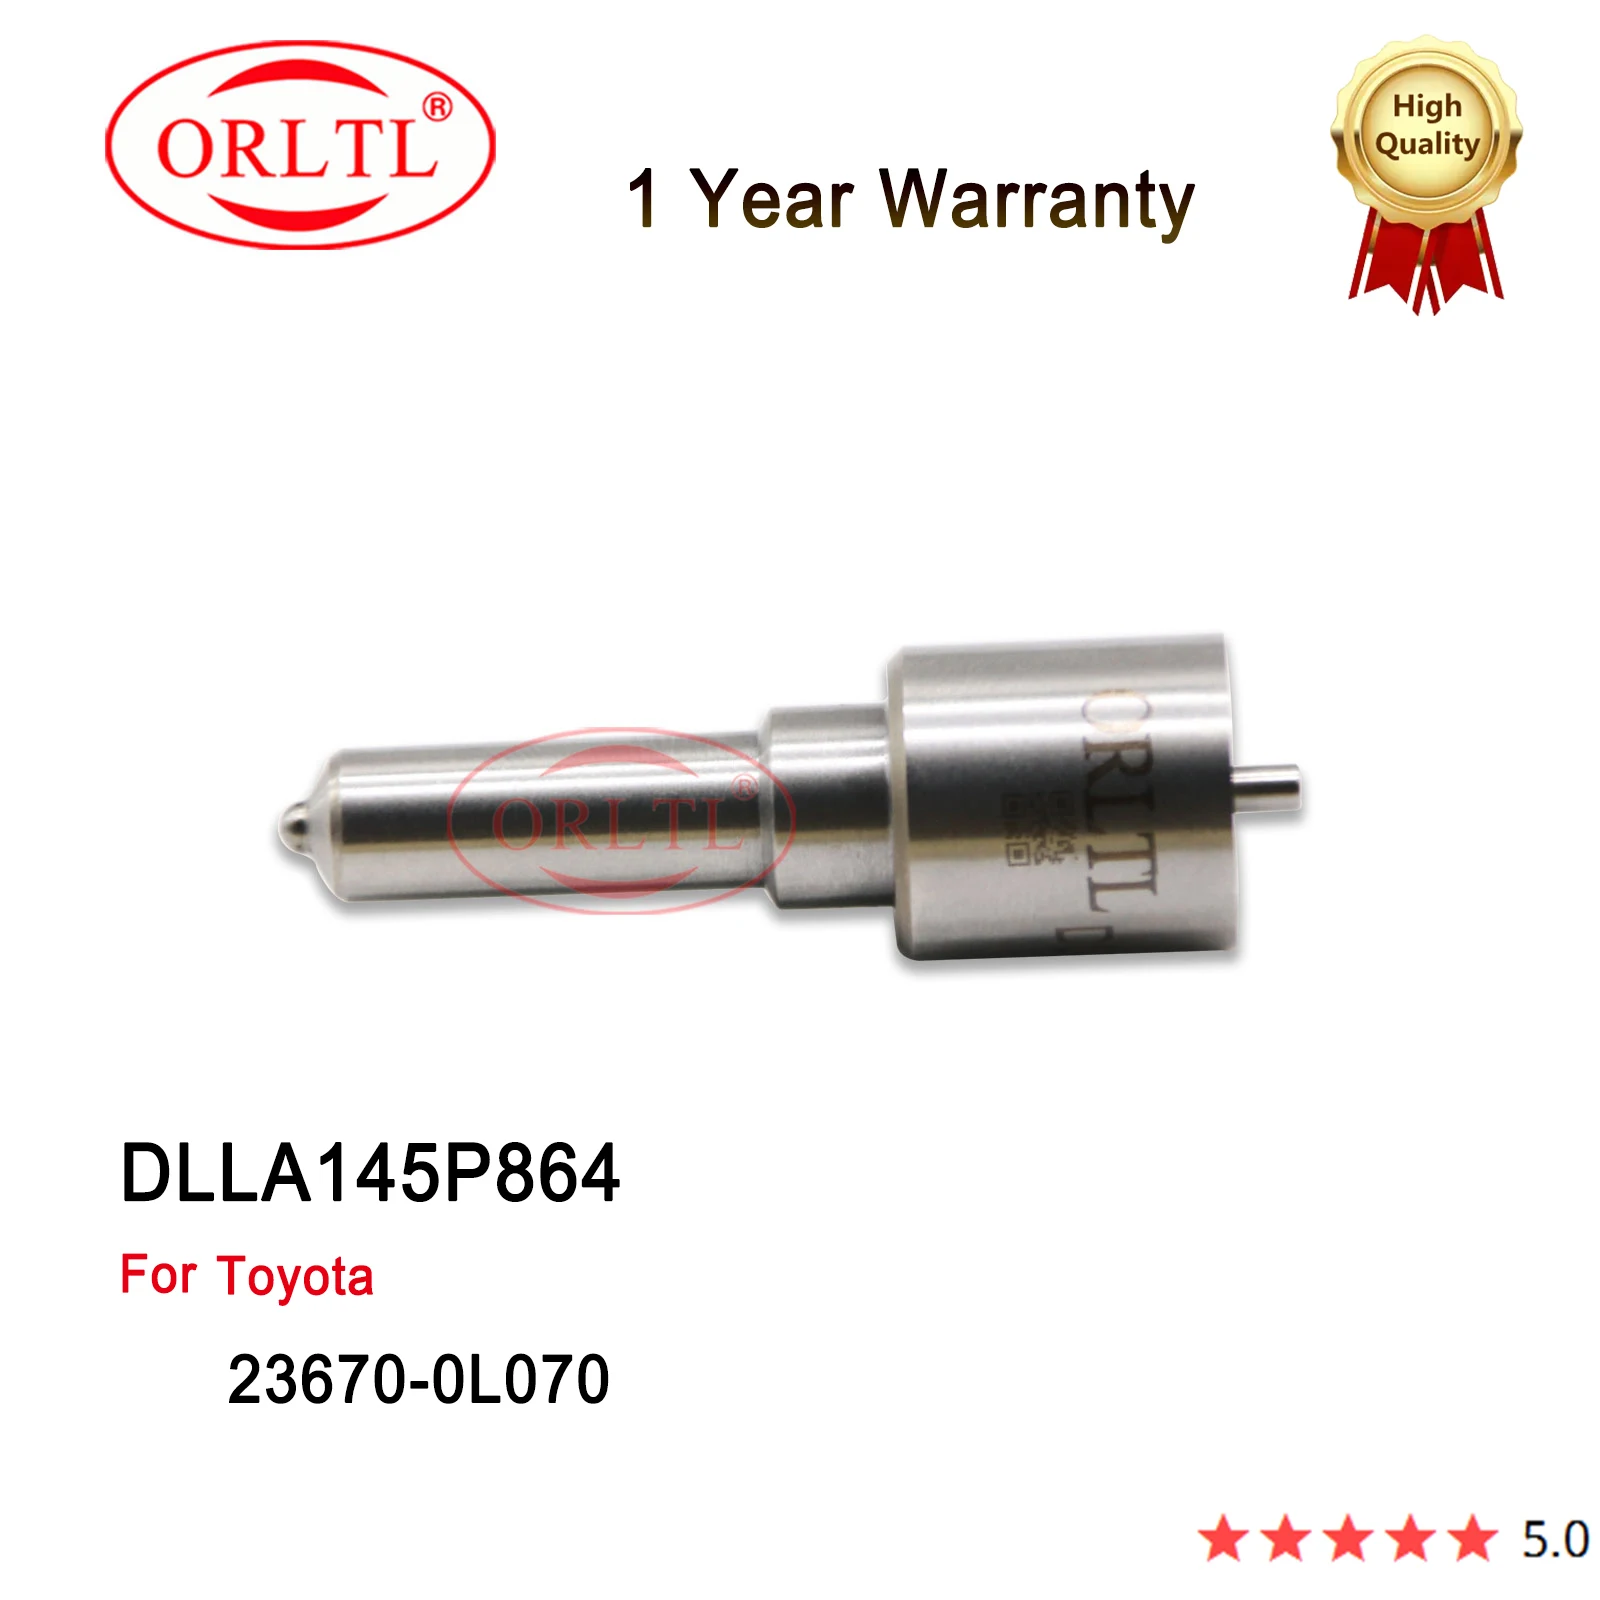 

23670-0L070 Common Rail Injector Nozzle Tips DLLA145P864 093400-8640 For Toyota Hilux 095000-7390 095000-5931 095000-7750